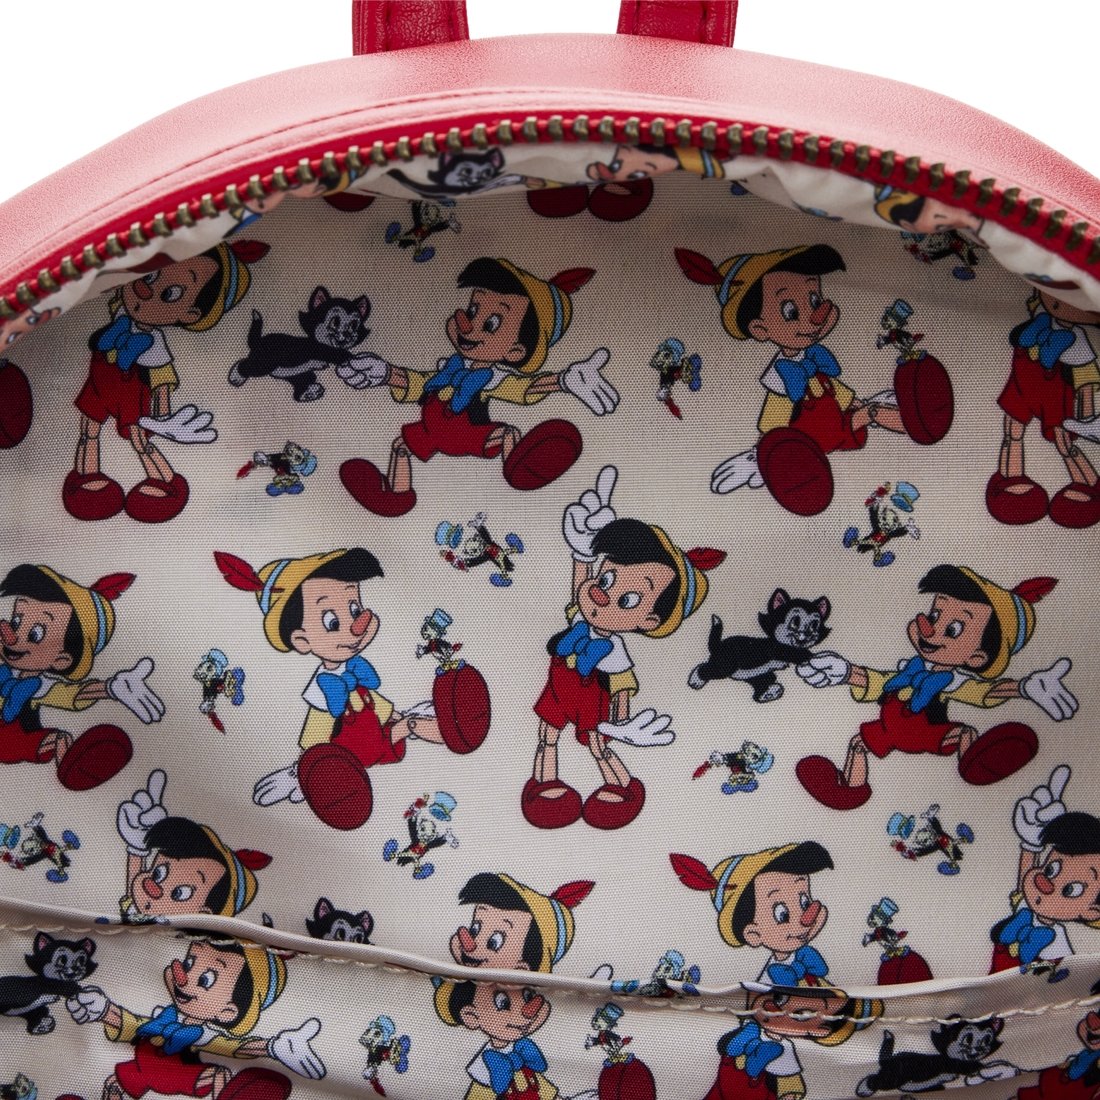 Pinocchio Marionette Mini Backpack - Rockamilly-Bags & Purses-Vintage